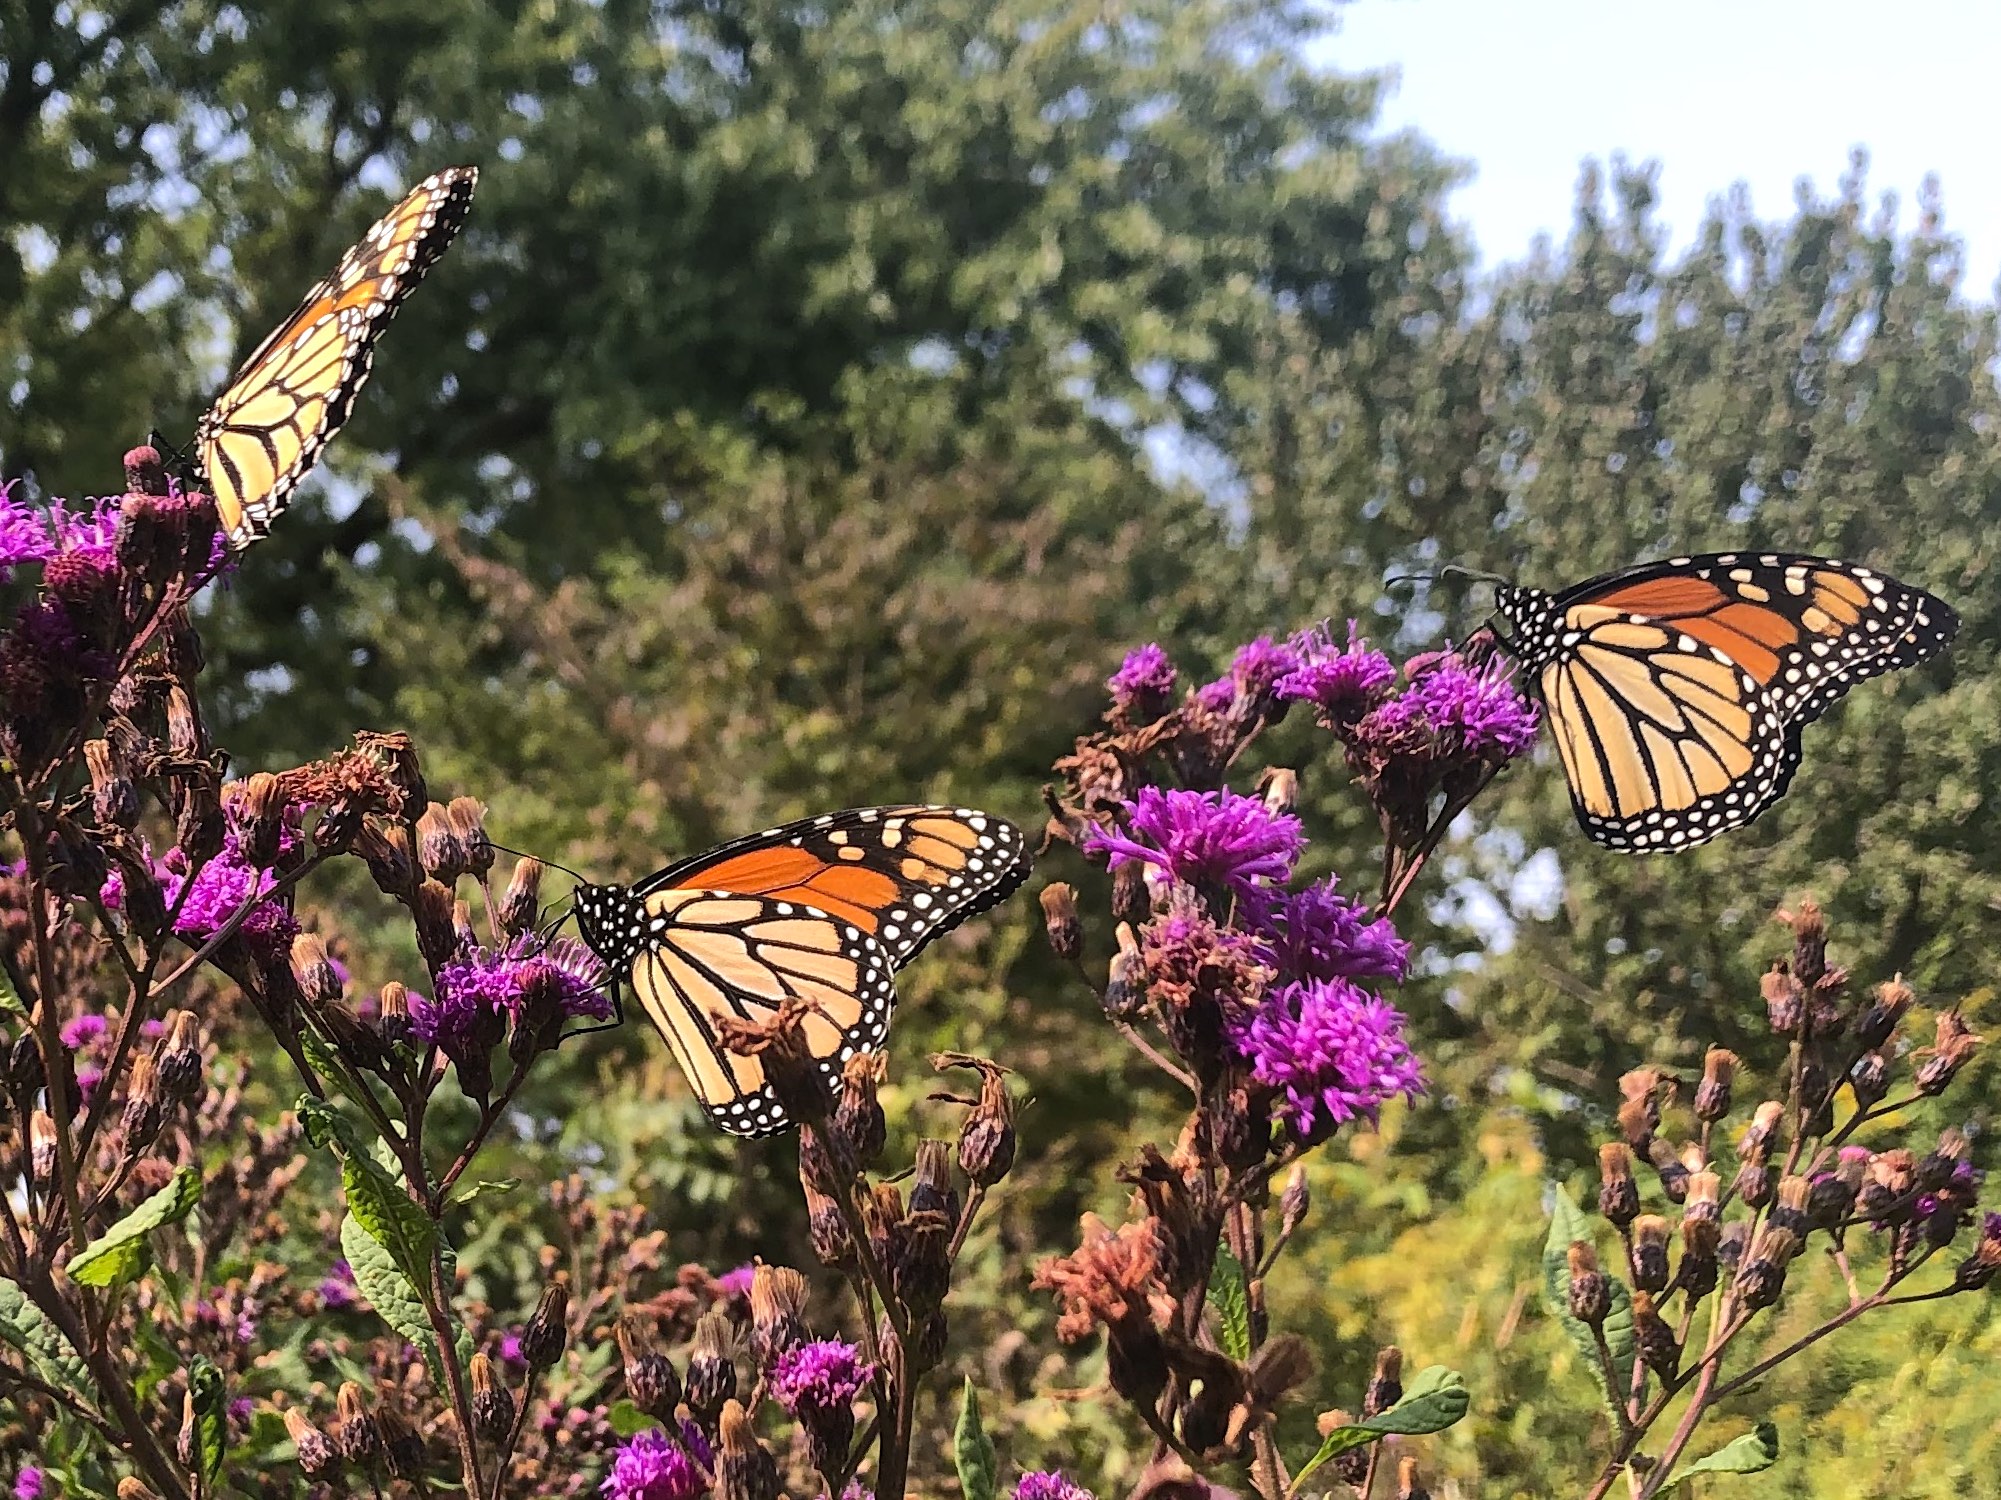 Monarchs on Ironweed on September 15, 2020.